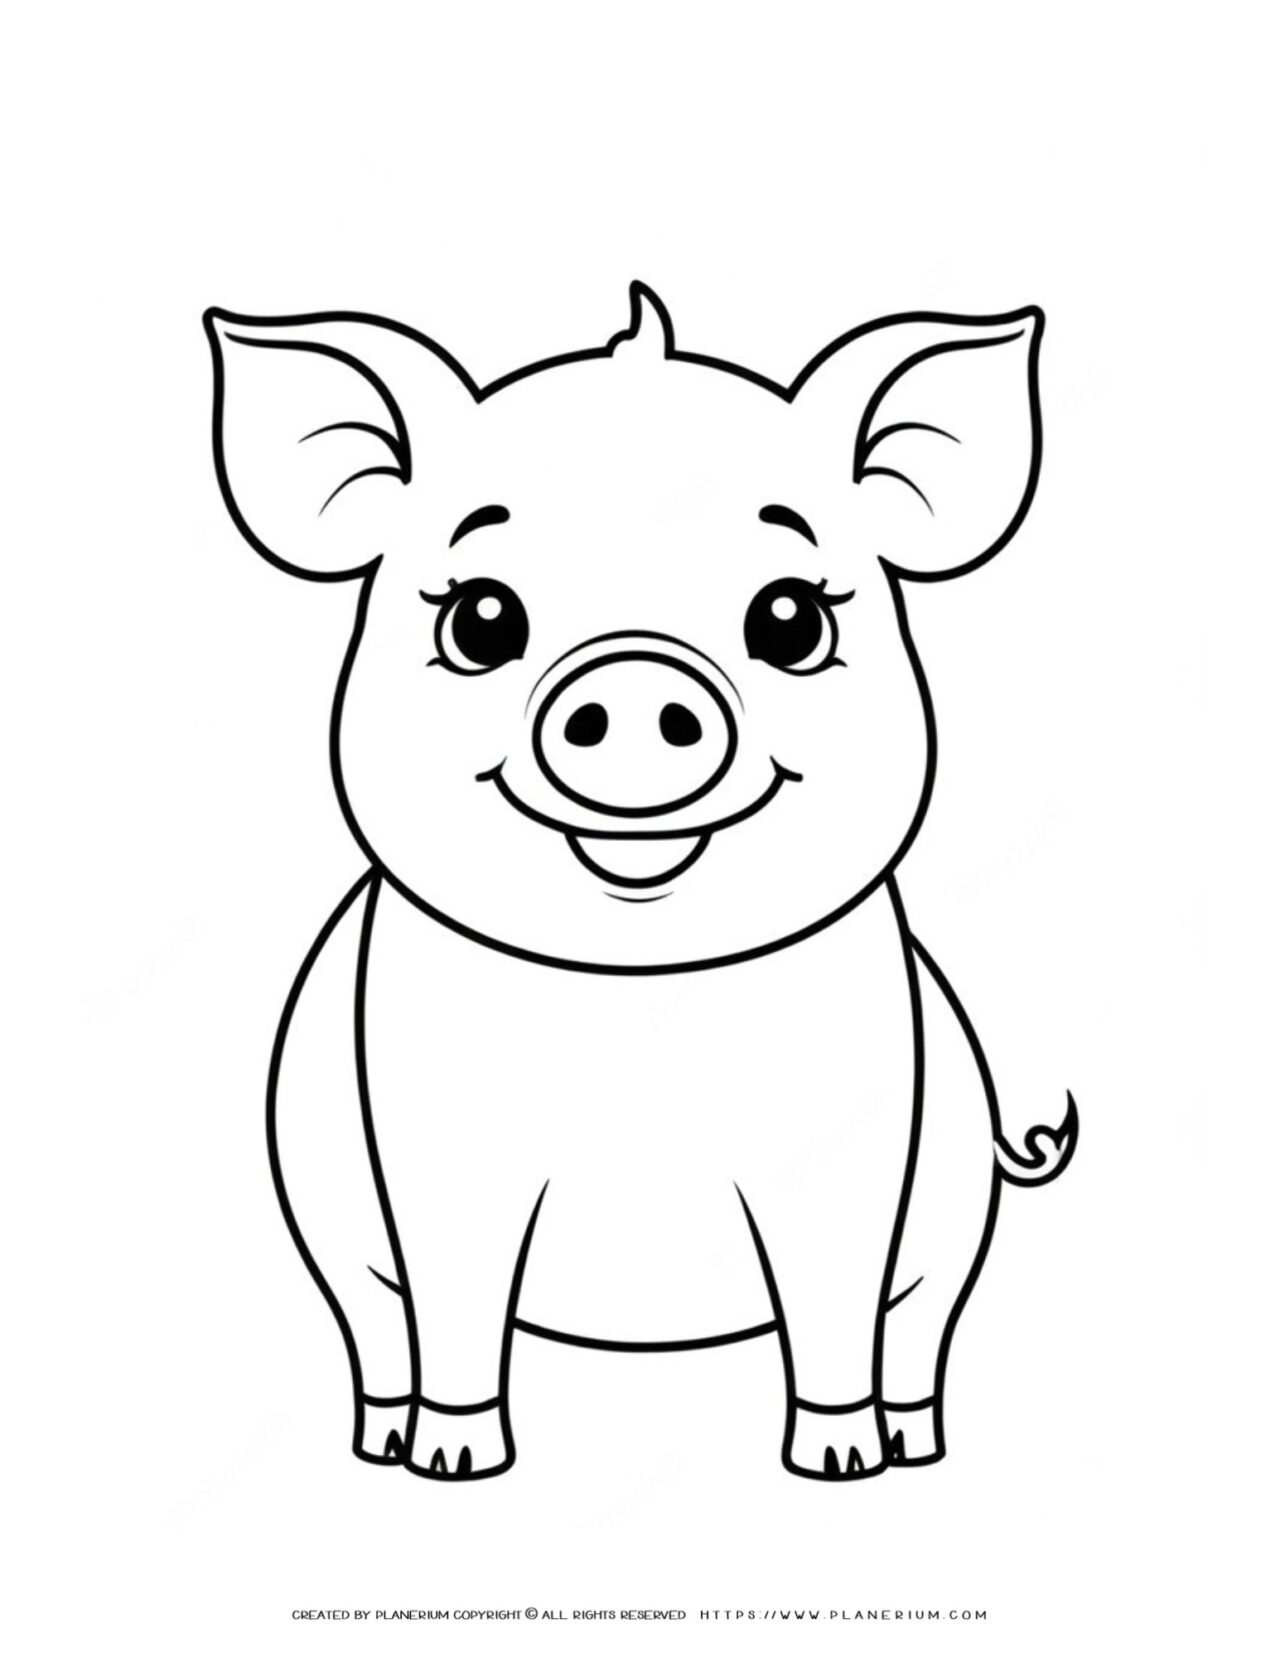 cute-happy-baby-pig-front-view-outline-coloring-page-for-kids